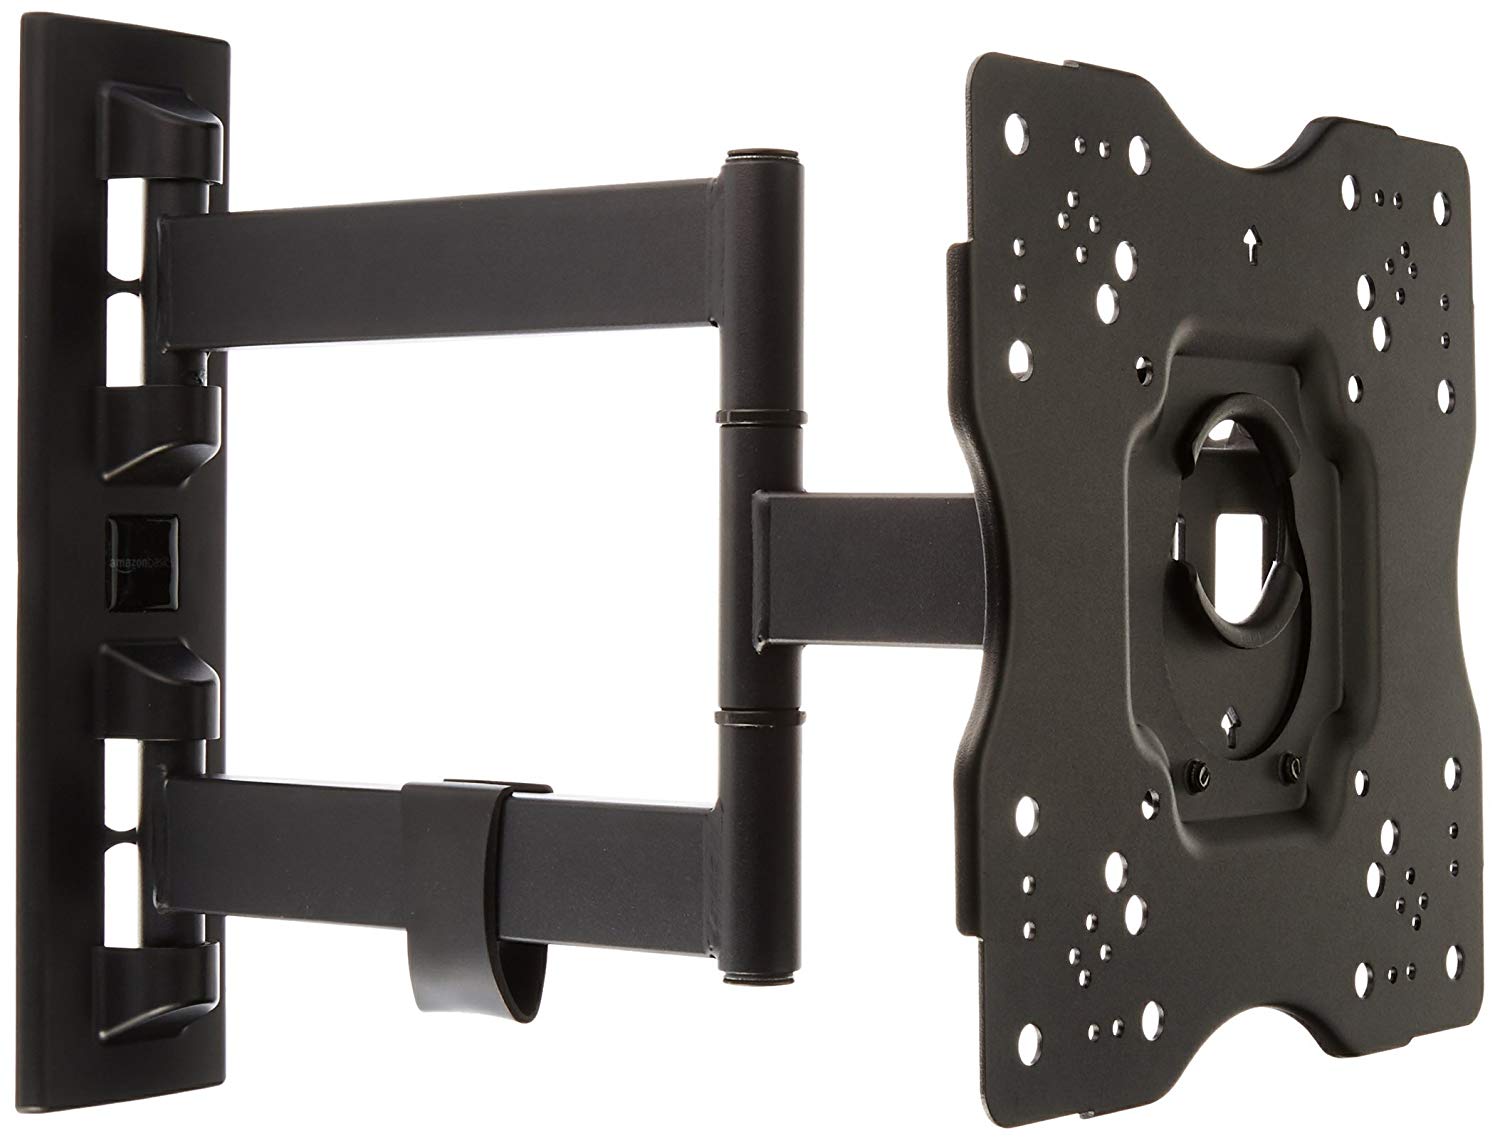 Fireplace Accessories Amazon Luxury Amazonbasics Heavy Duty Full Motion Articulating Tv Wall Mount for 22 Inch to 55 Inch Led Lcd Flat Screen Tvs